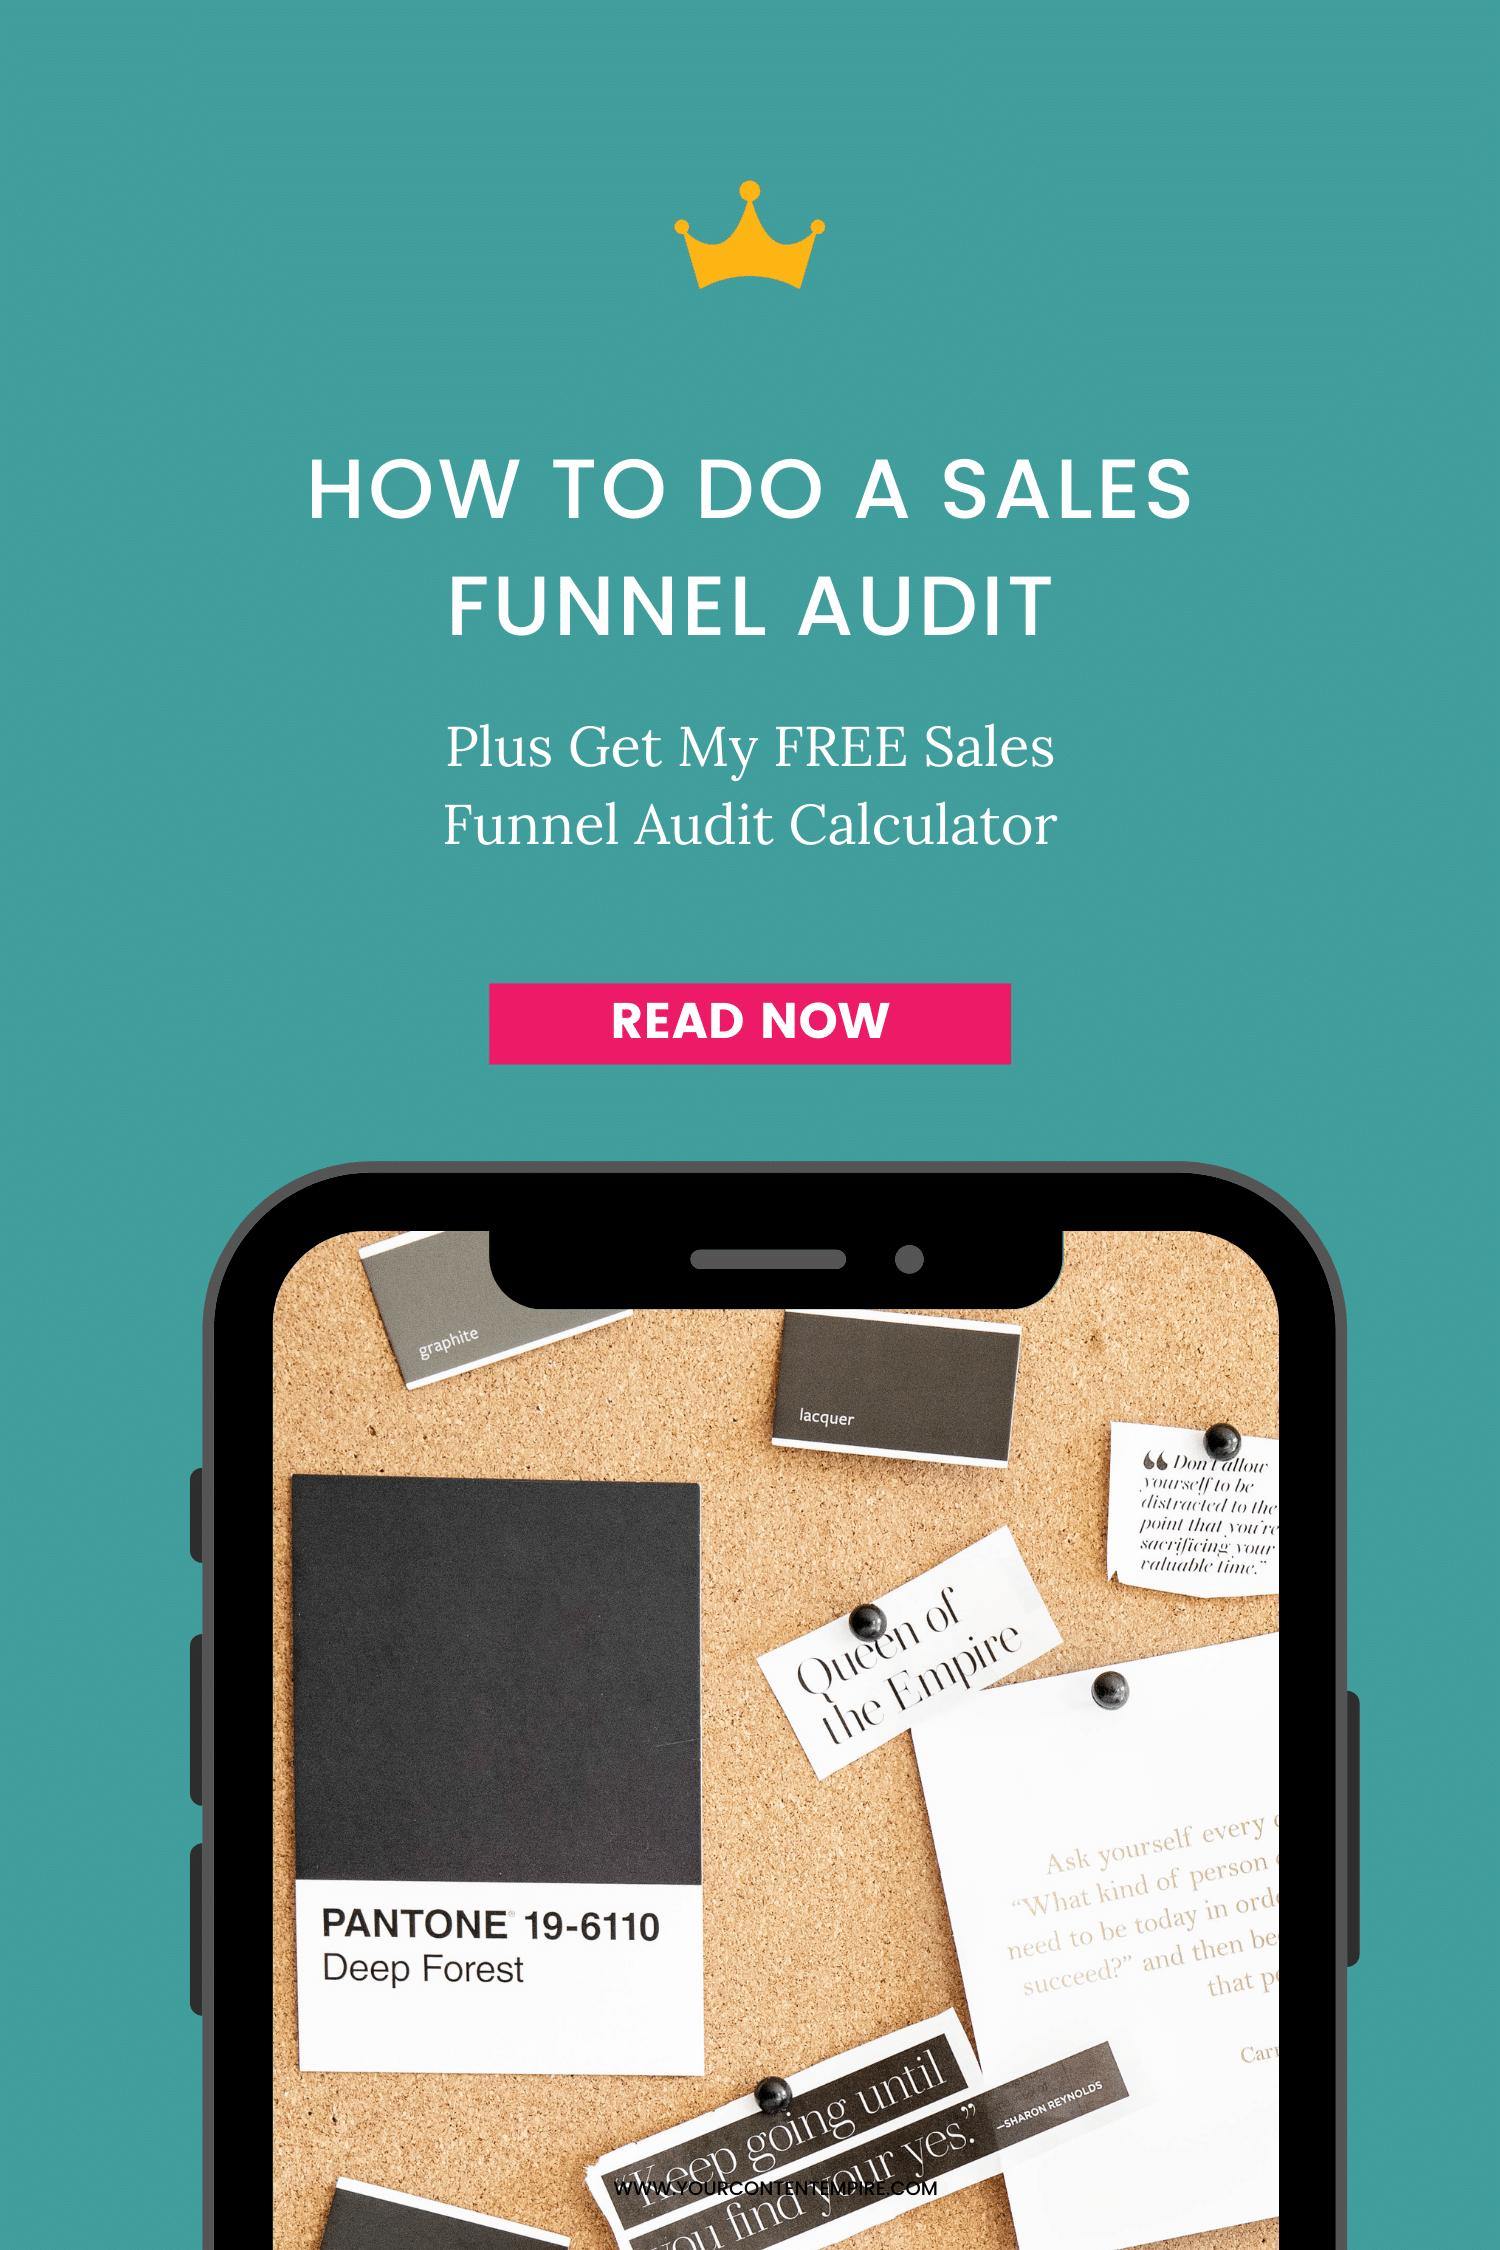 How To Do a Sales Funnel Audit